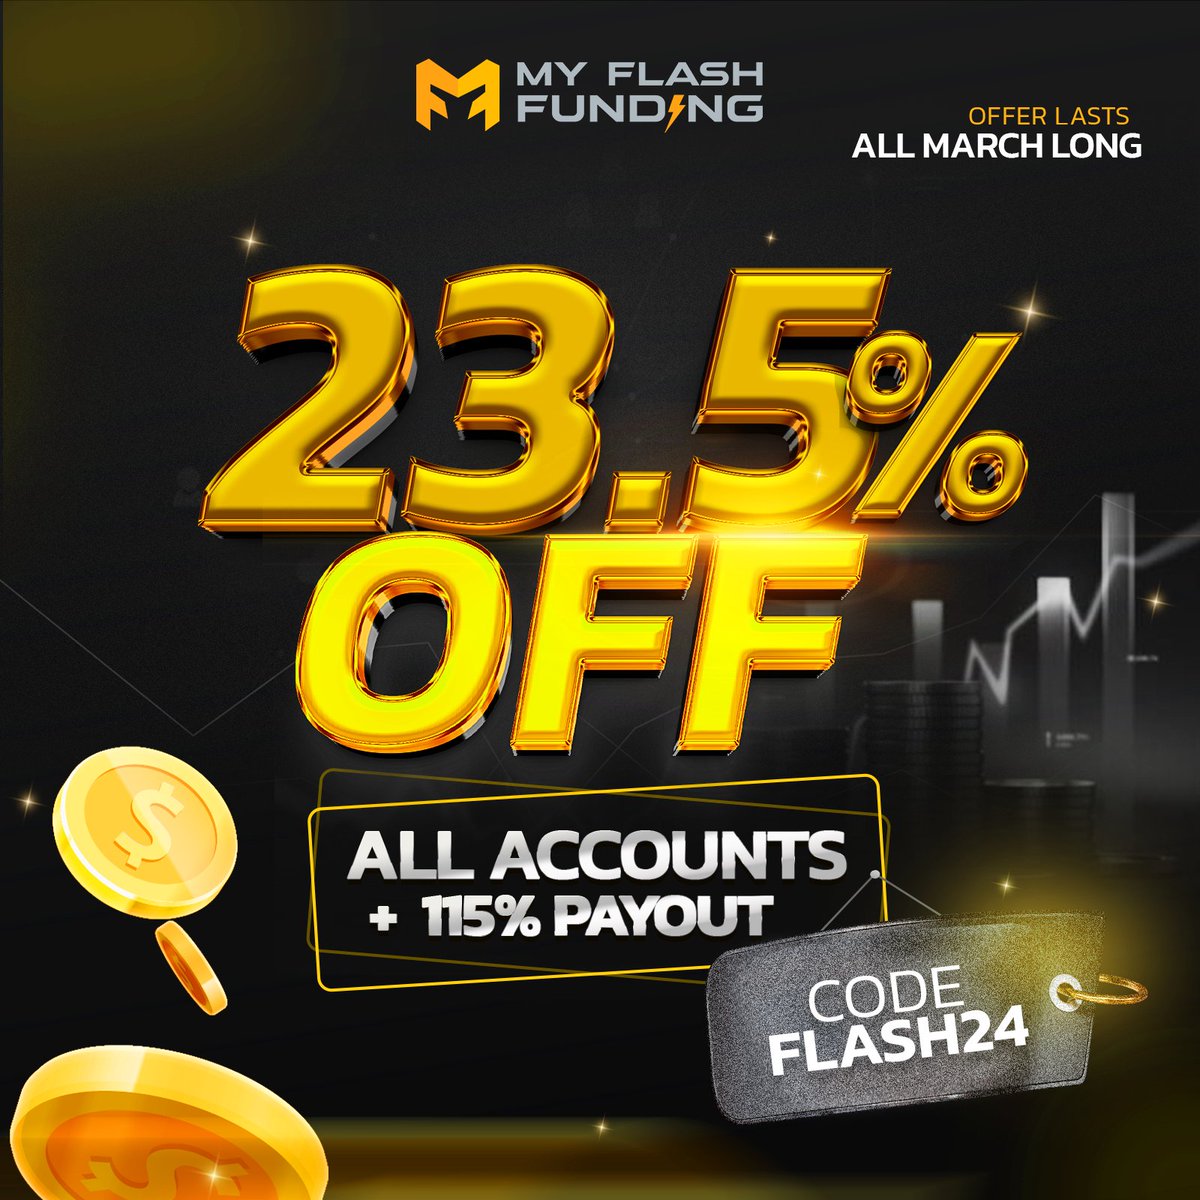 Get 23.5% OFF + a 115% REFUND! ⚡️ Code: FLASH24 Act fast, this offer is valid until the end of the month! Don't wait - secure your funding NOW 👉 myflashfunding.com